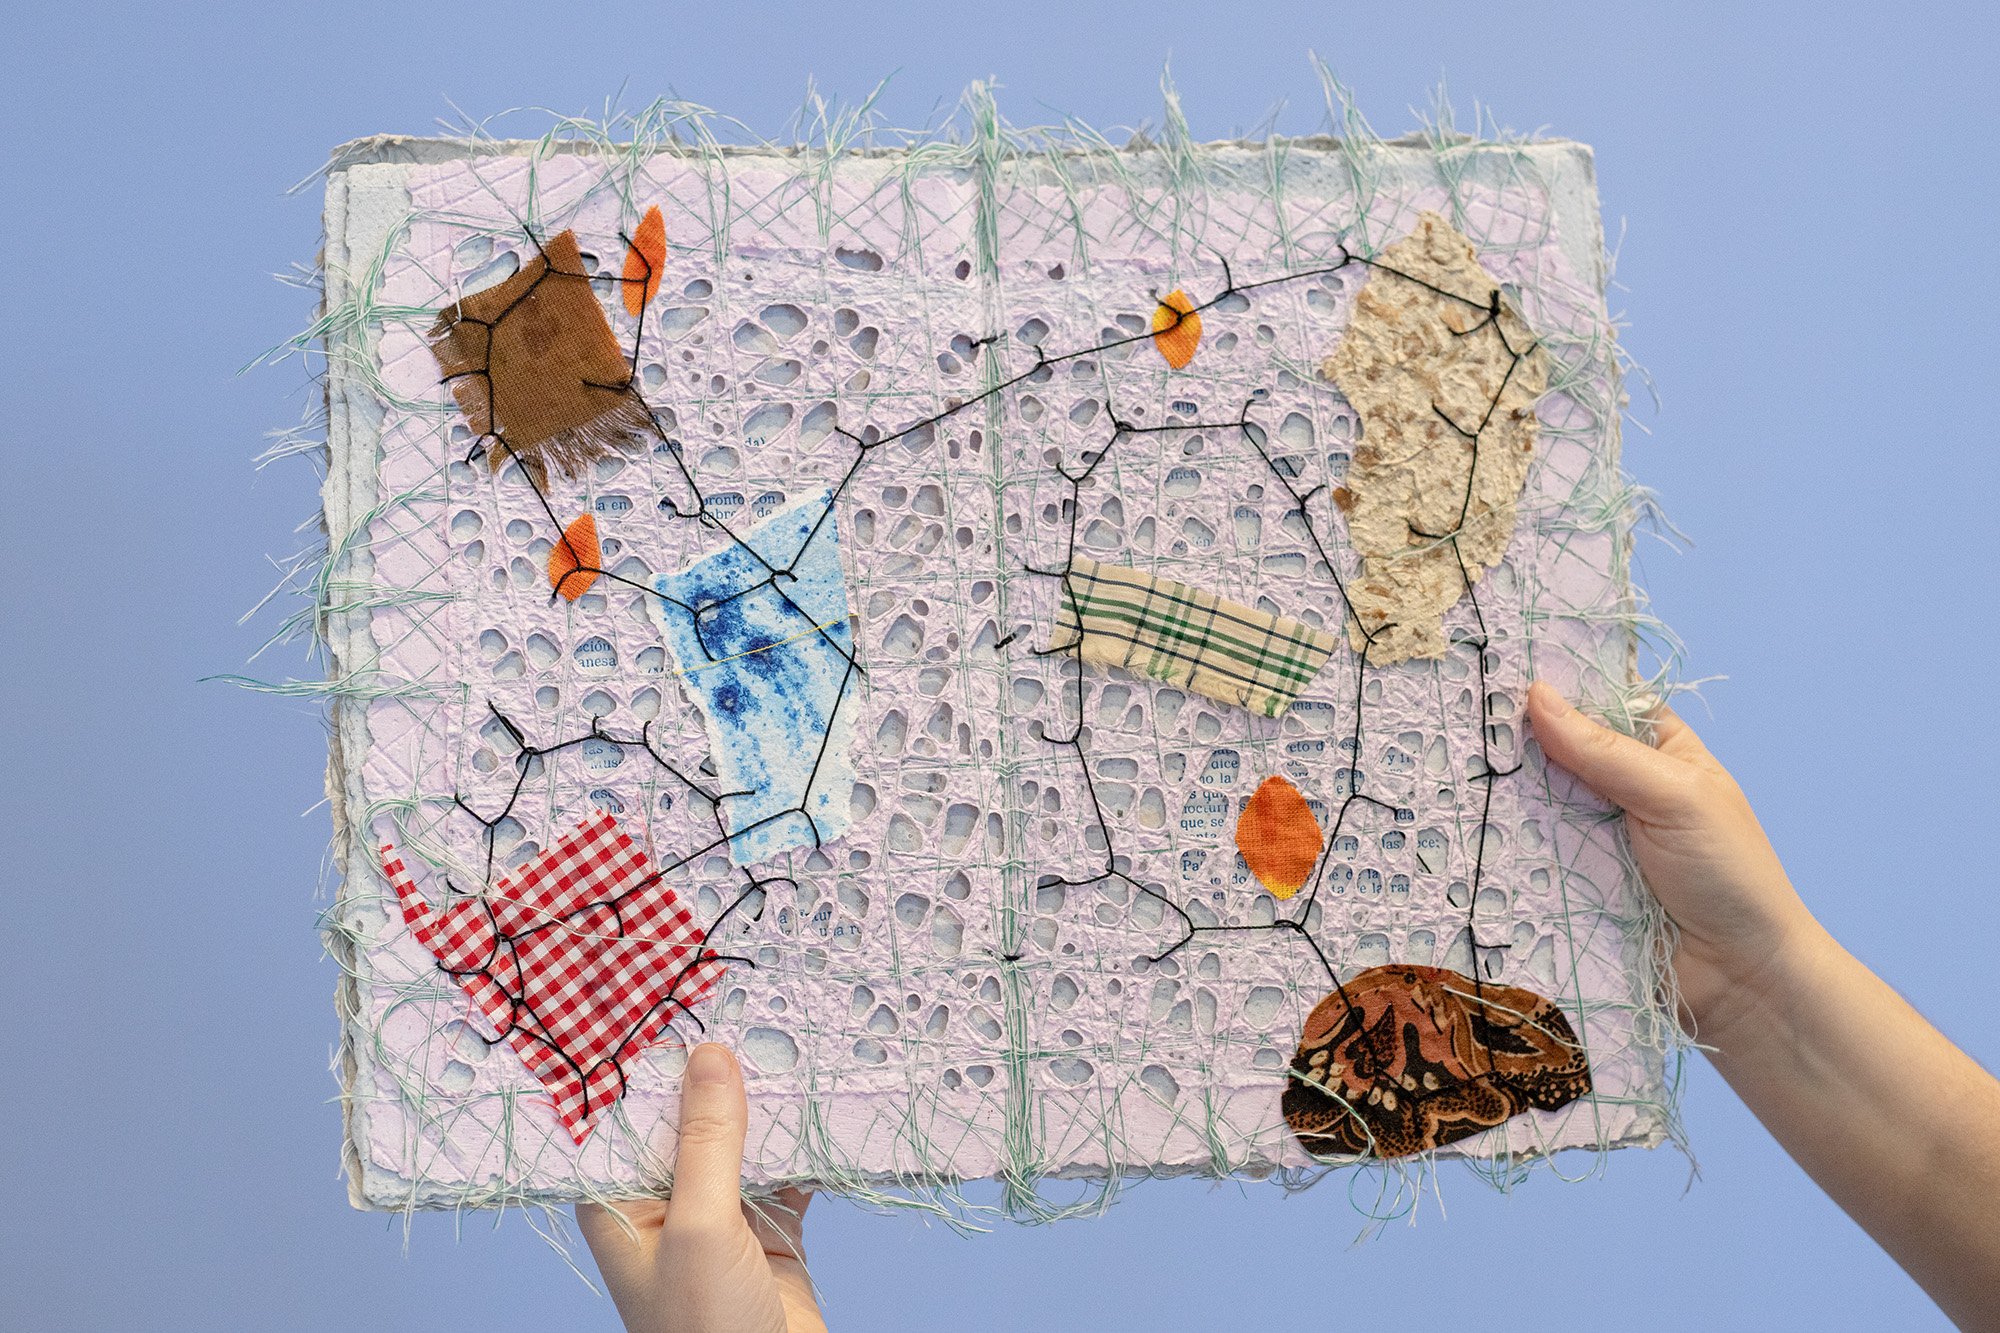 Hands holding up a publication made from handmade paper and stitching